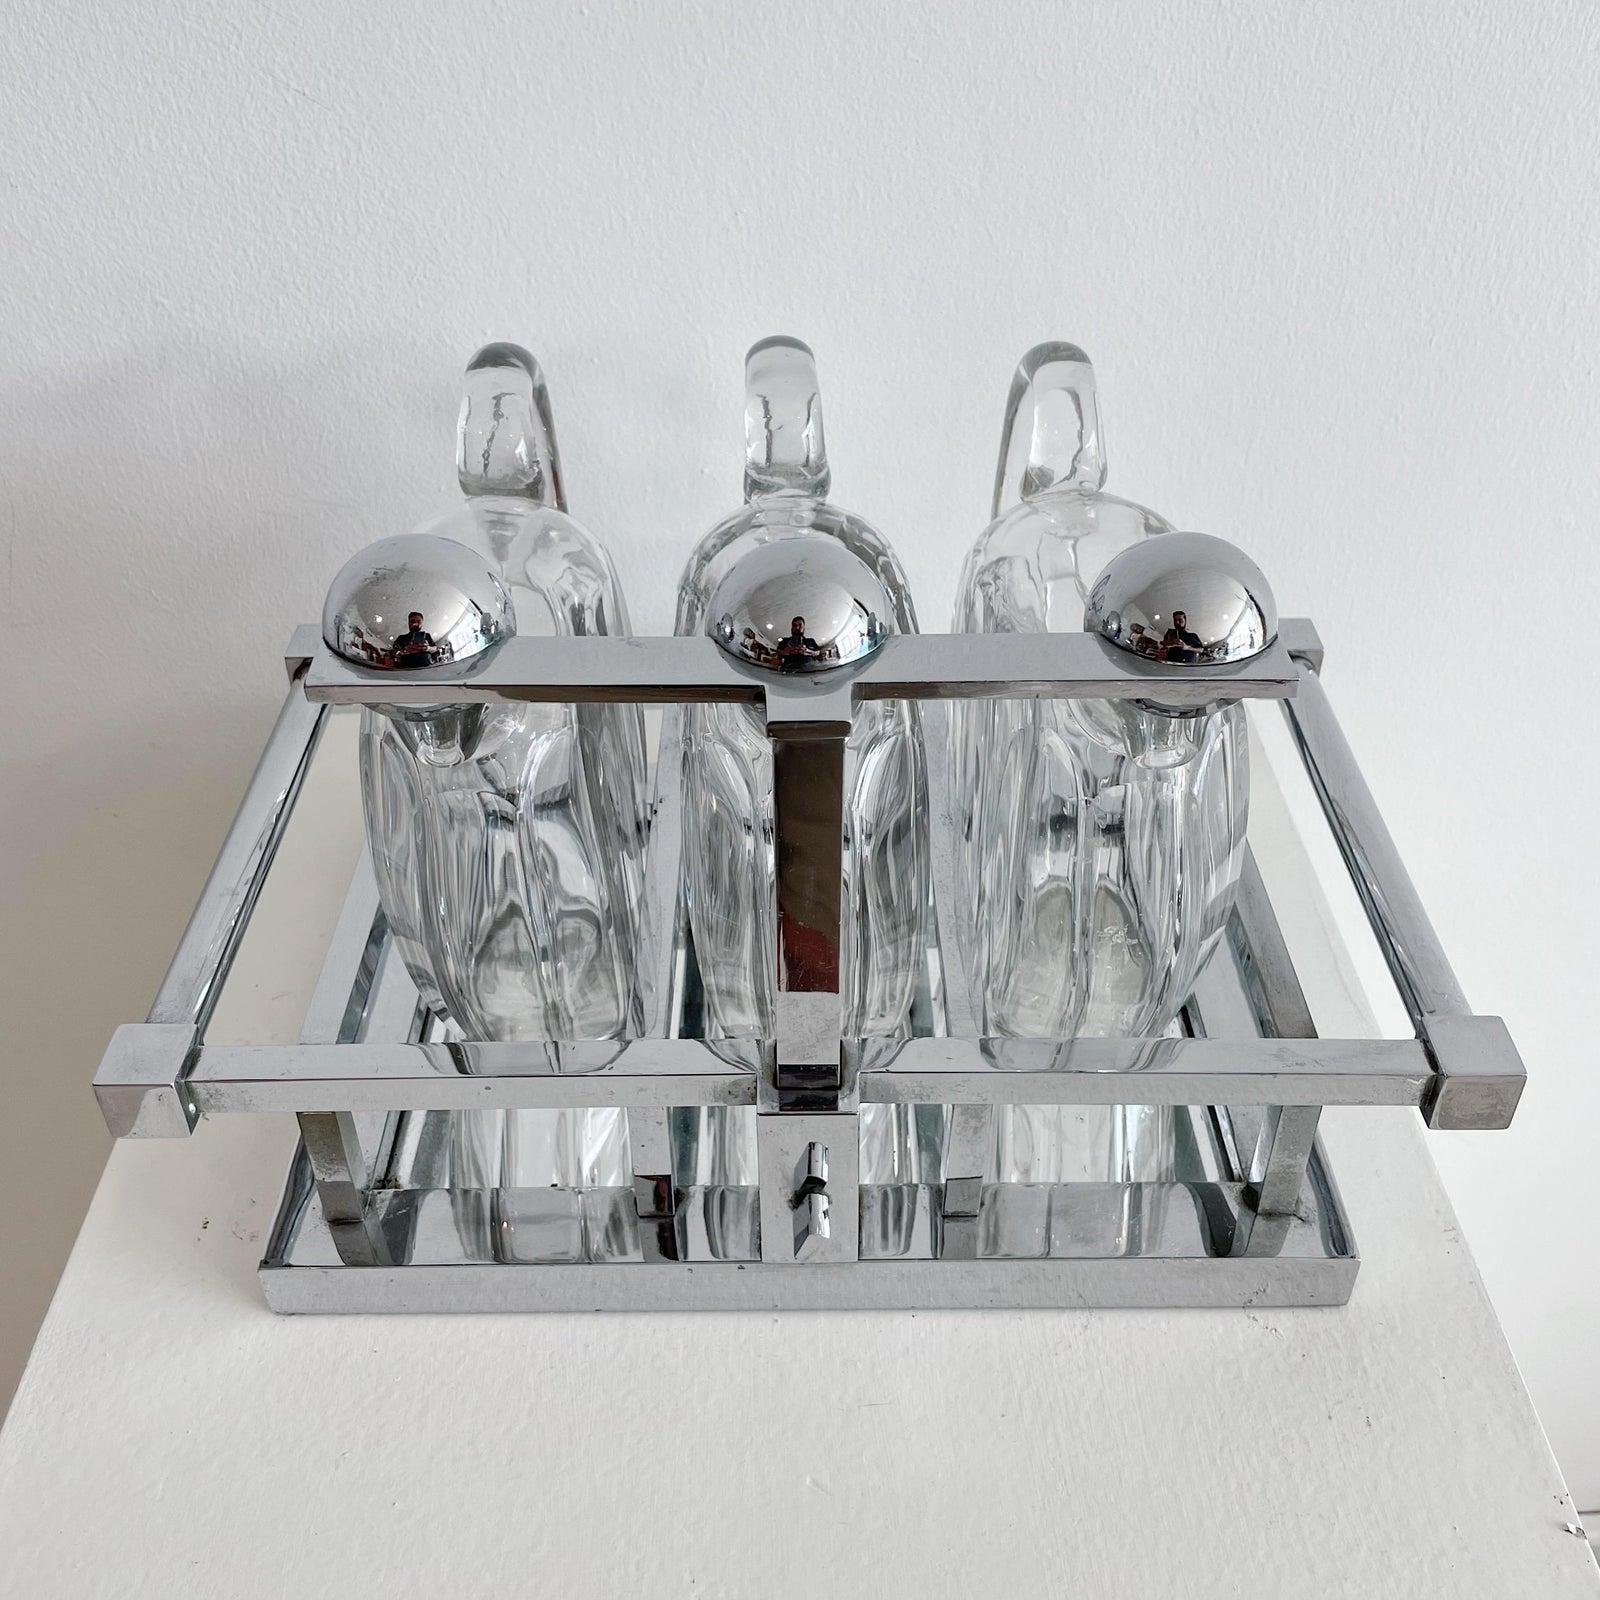 A very rare modernist chromed metal & faceted crystal tantalus by Jacques Adnet and Baccarat, circa 1930. Three Baccarat crystal decanters, signed under each.
Lockable latch to secure the decanters.